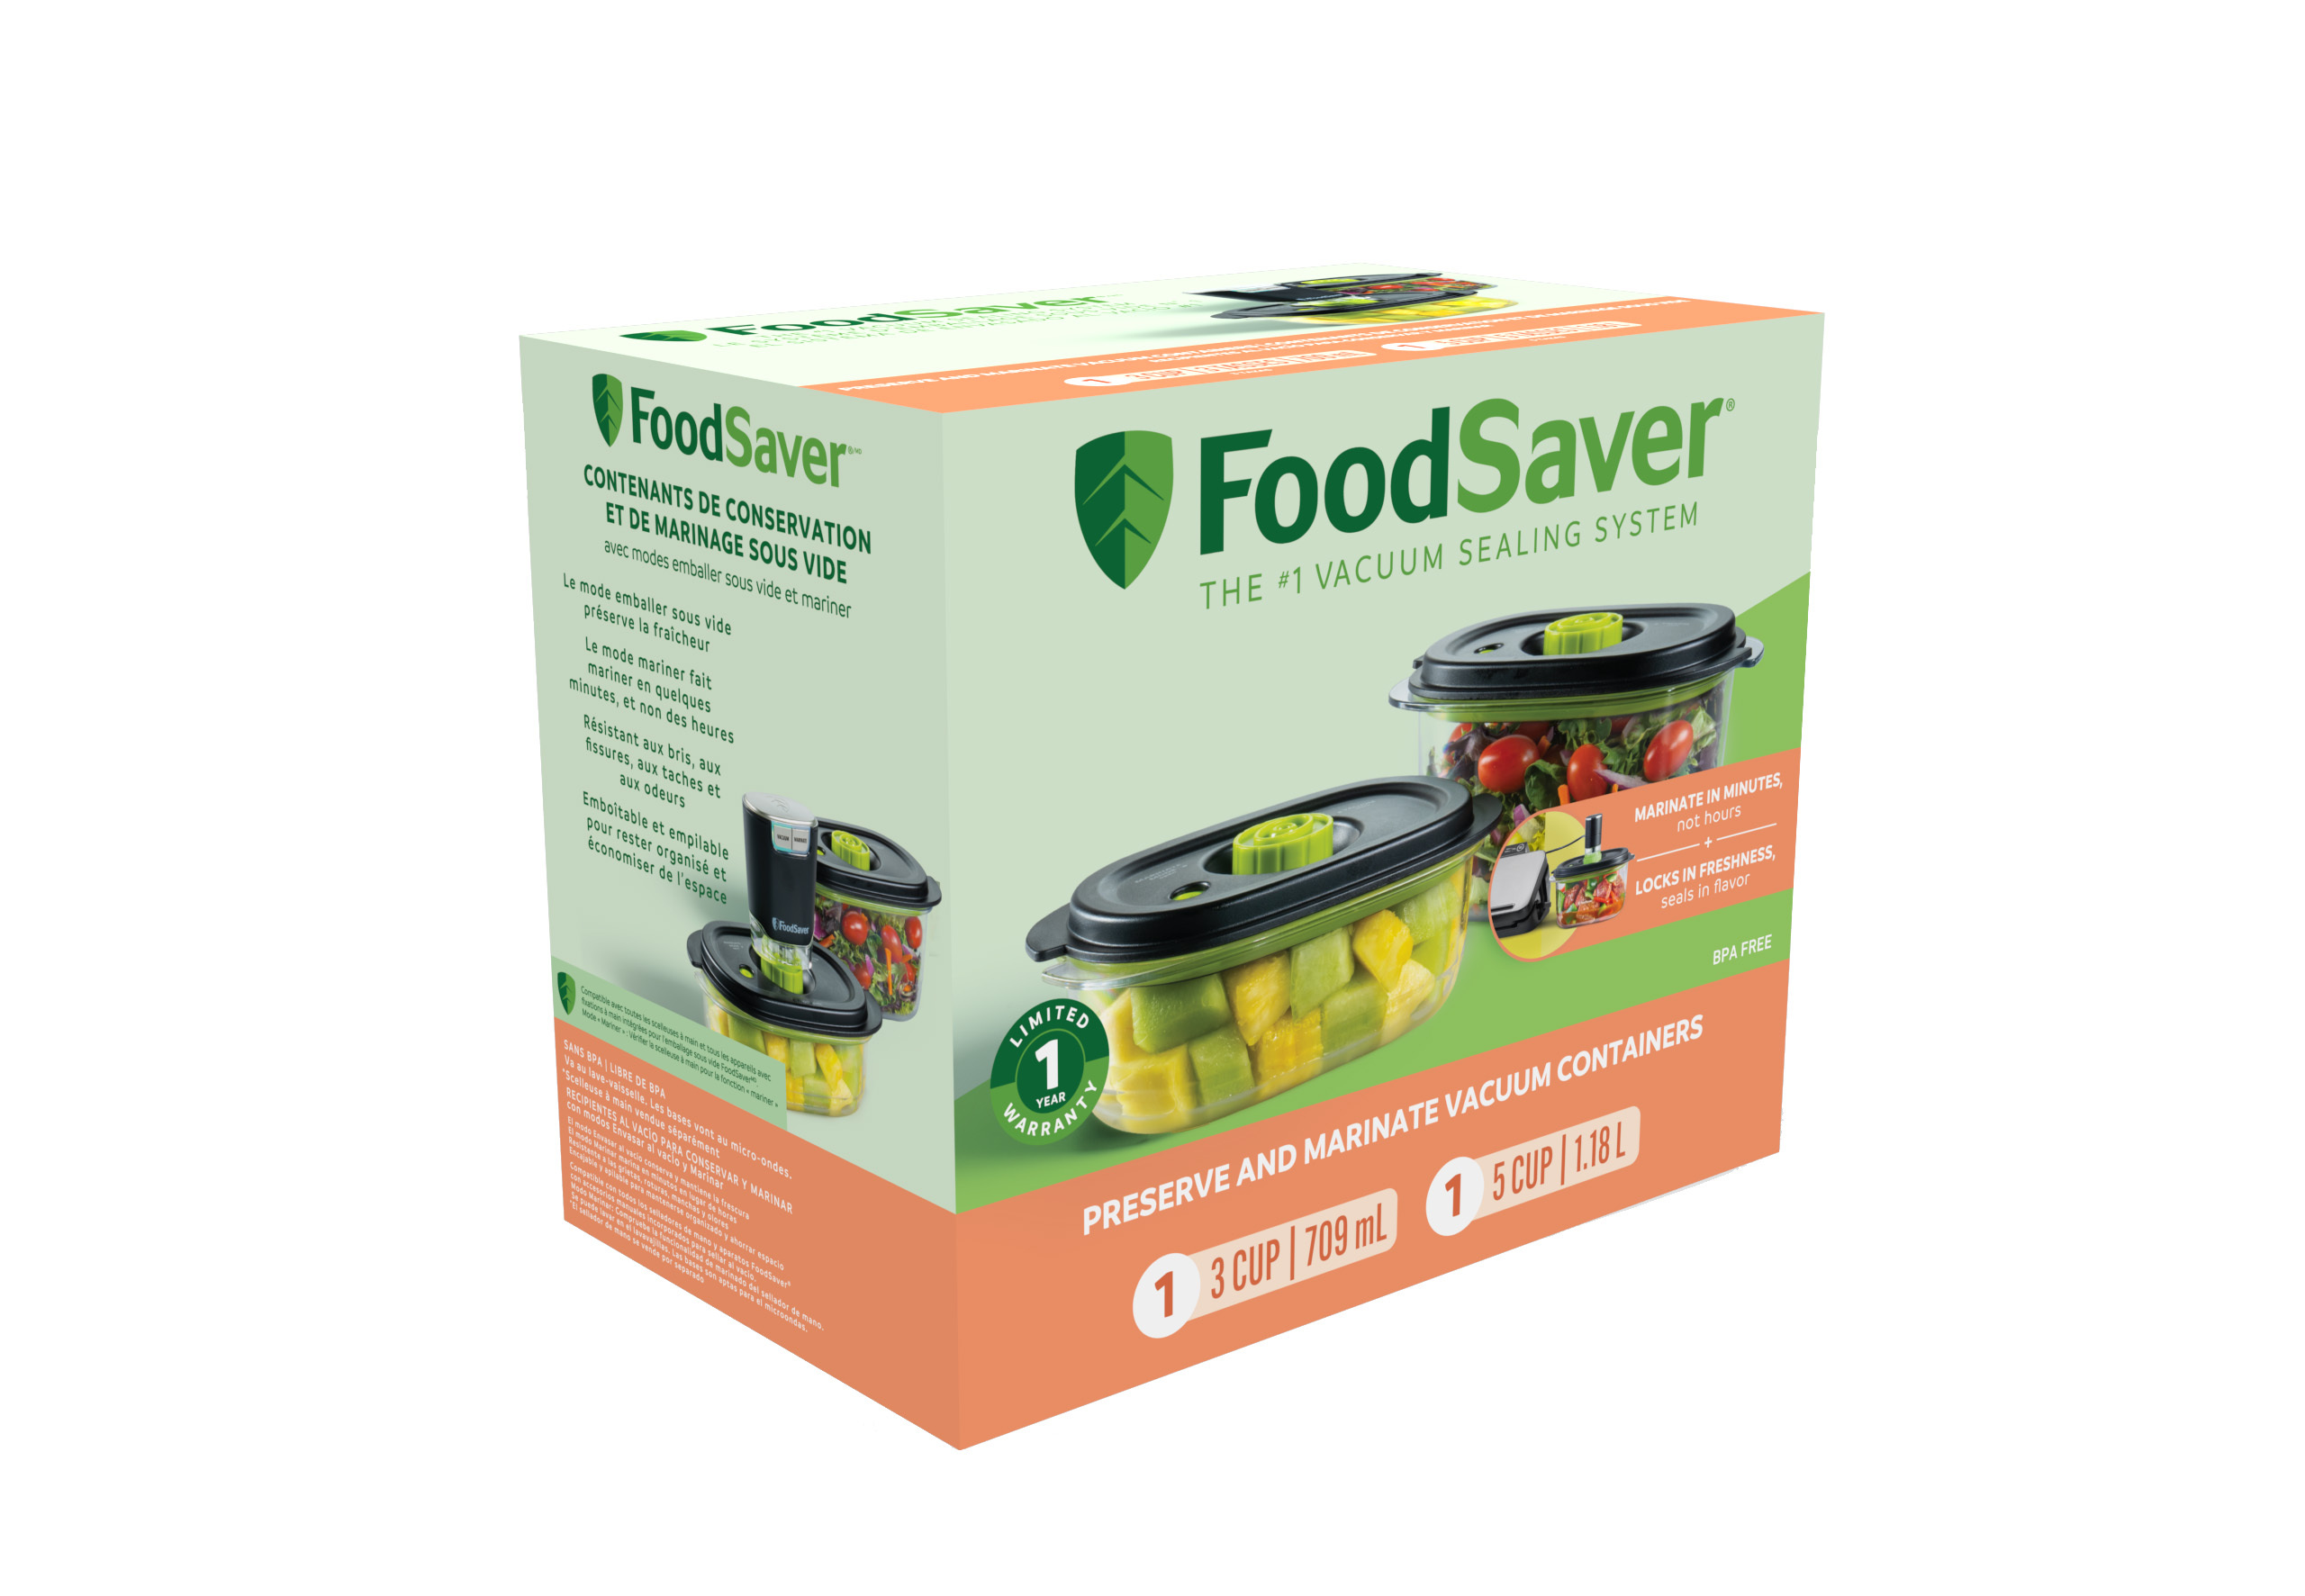 FoodSaver Preserve & Marinate Vacuum Containers, 3-Cup & 5-Cup Set - image 3 of 11